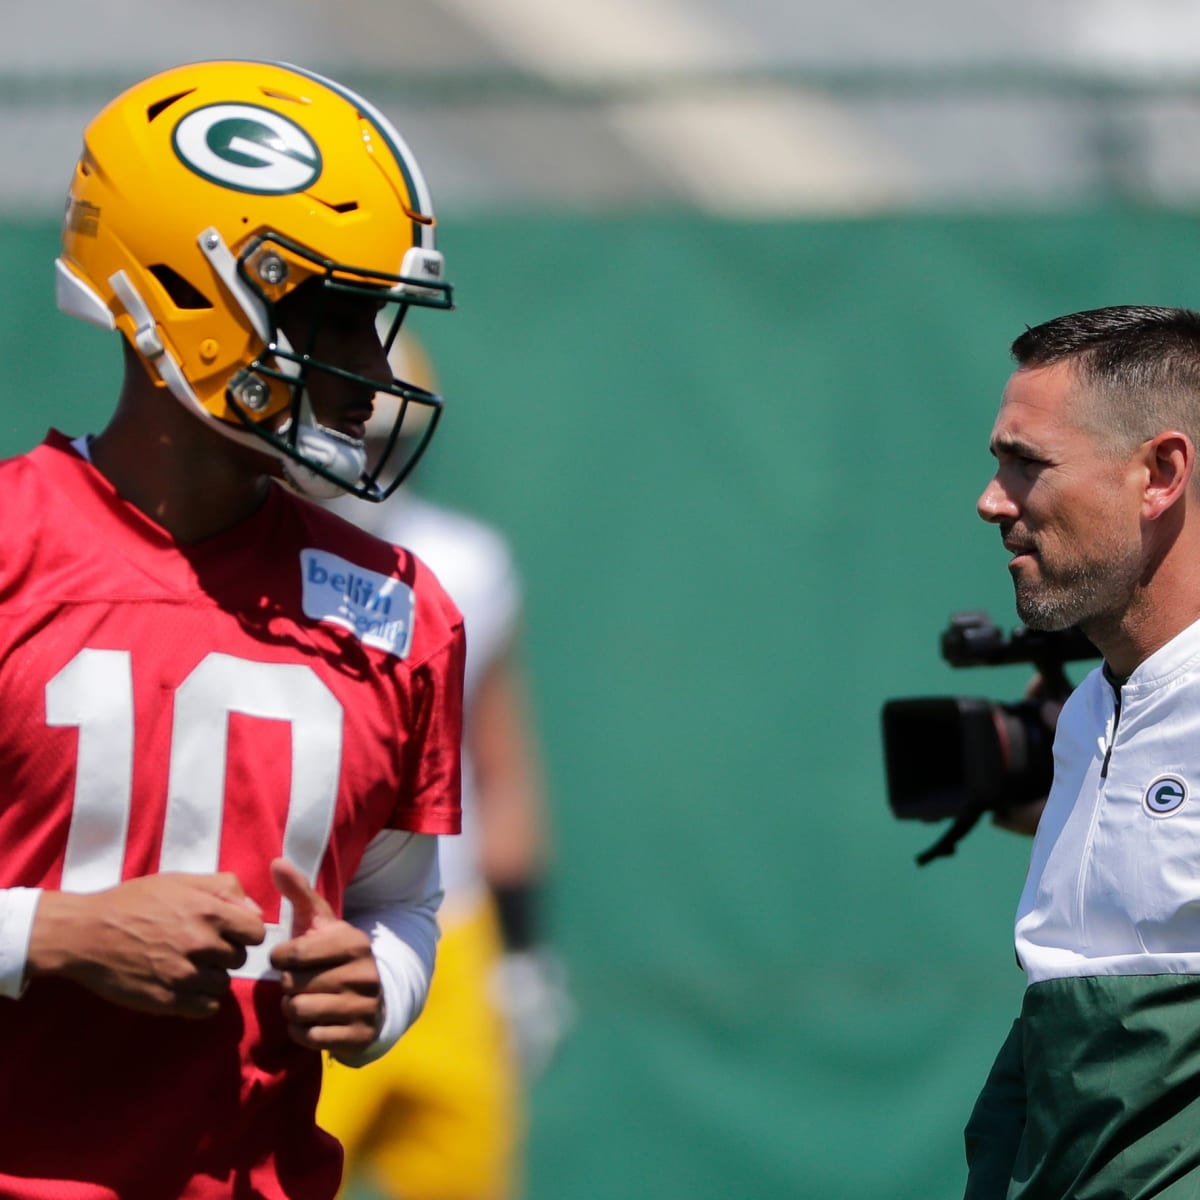 Packers ground game key with young QB